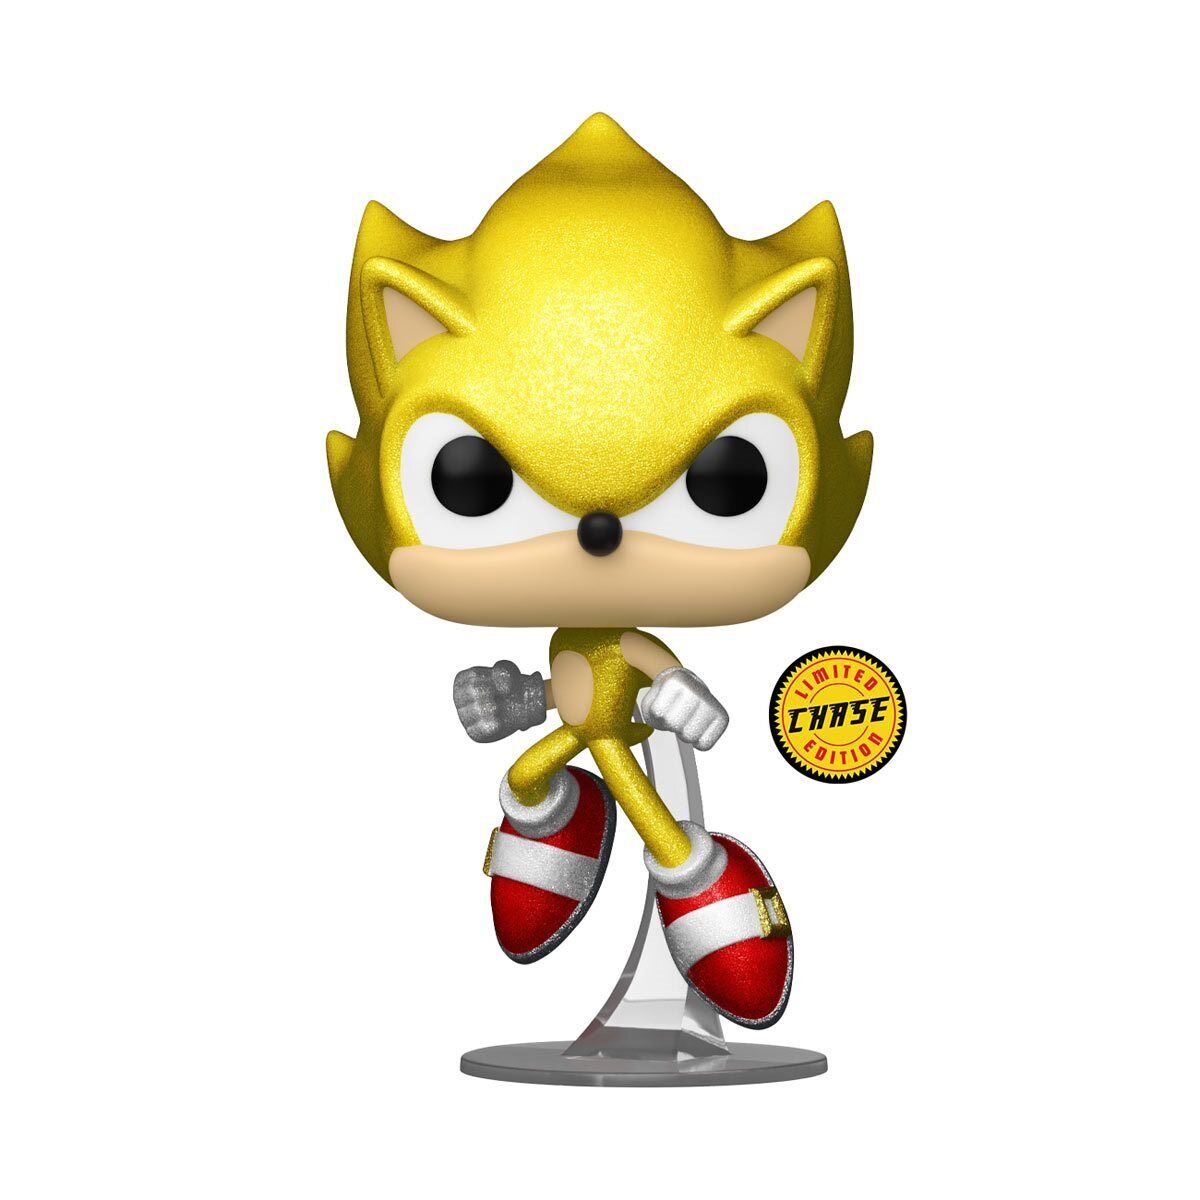 Sonic the Hedgehog: Super Sonic (AAA Limited Edition)